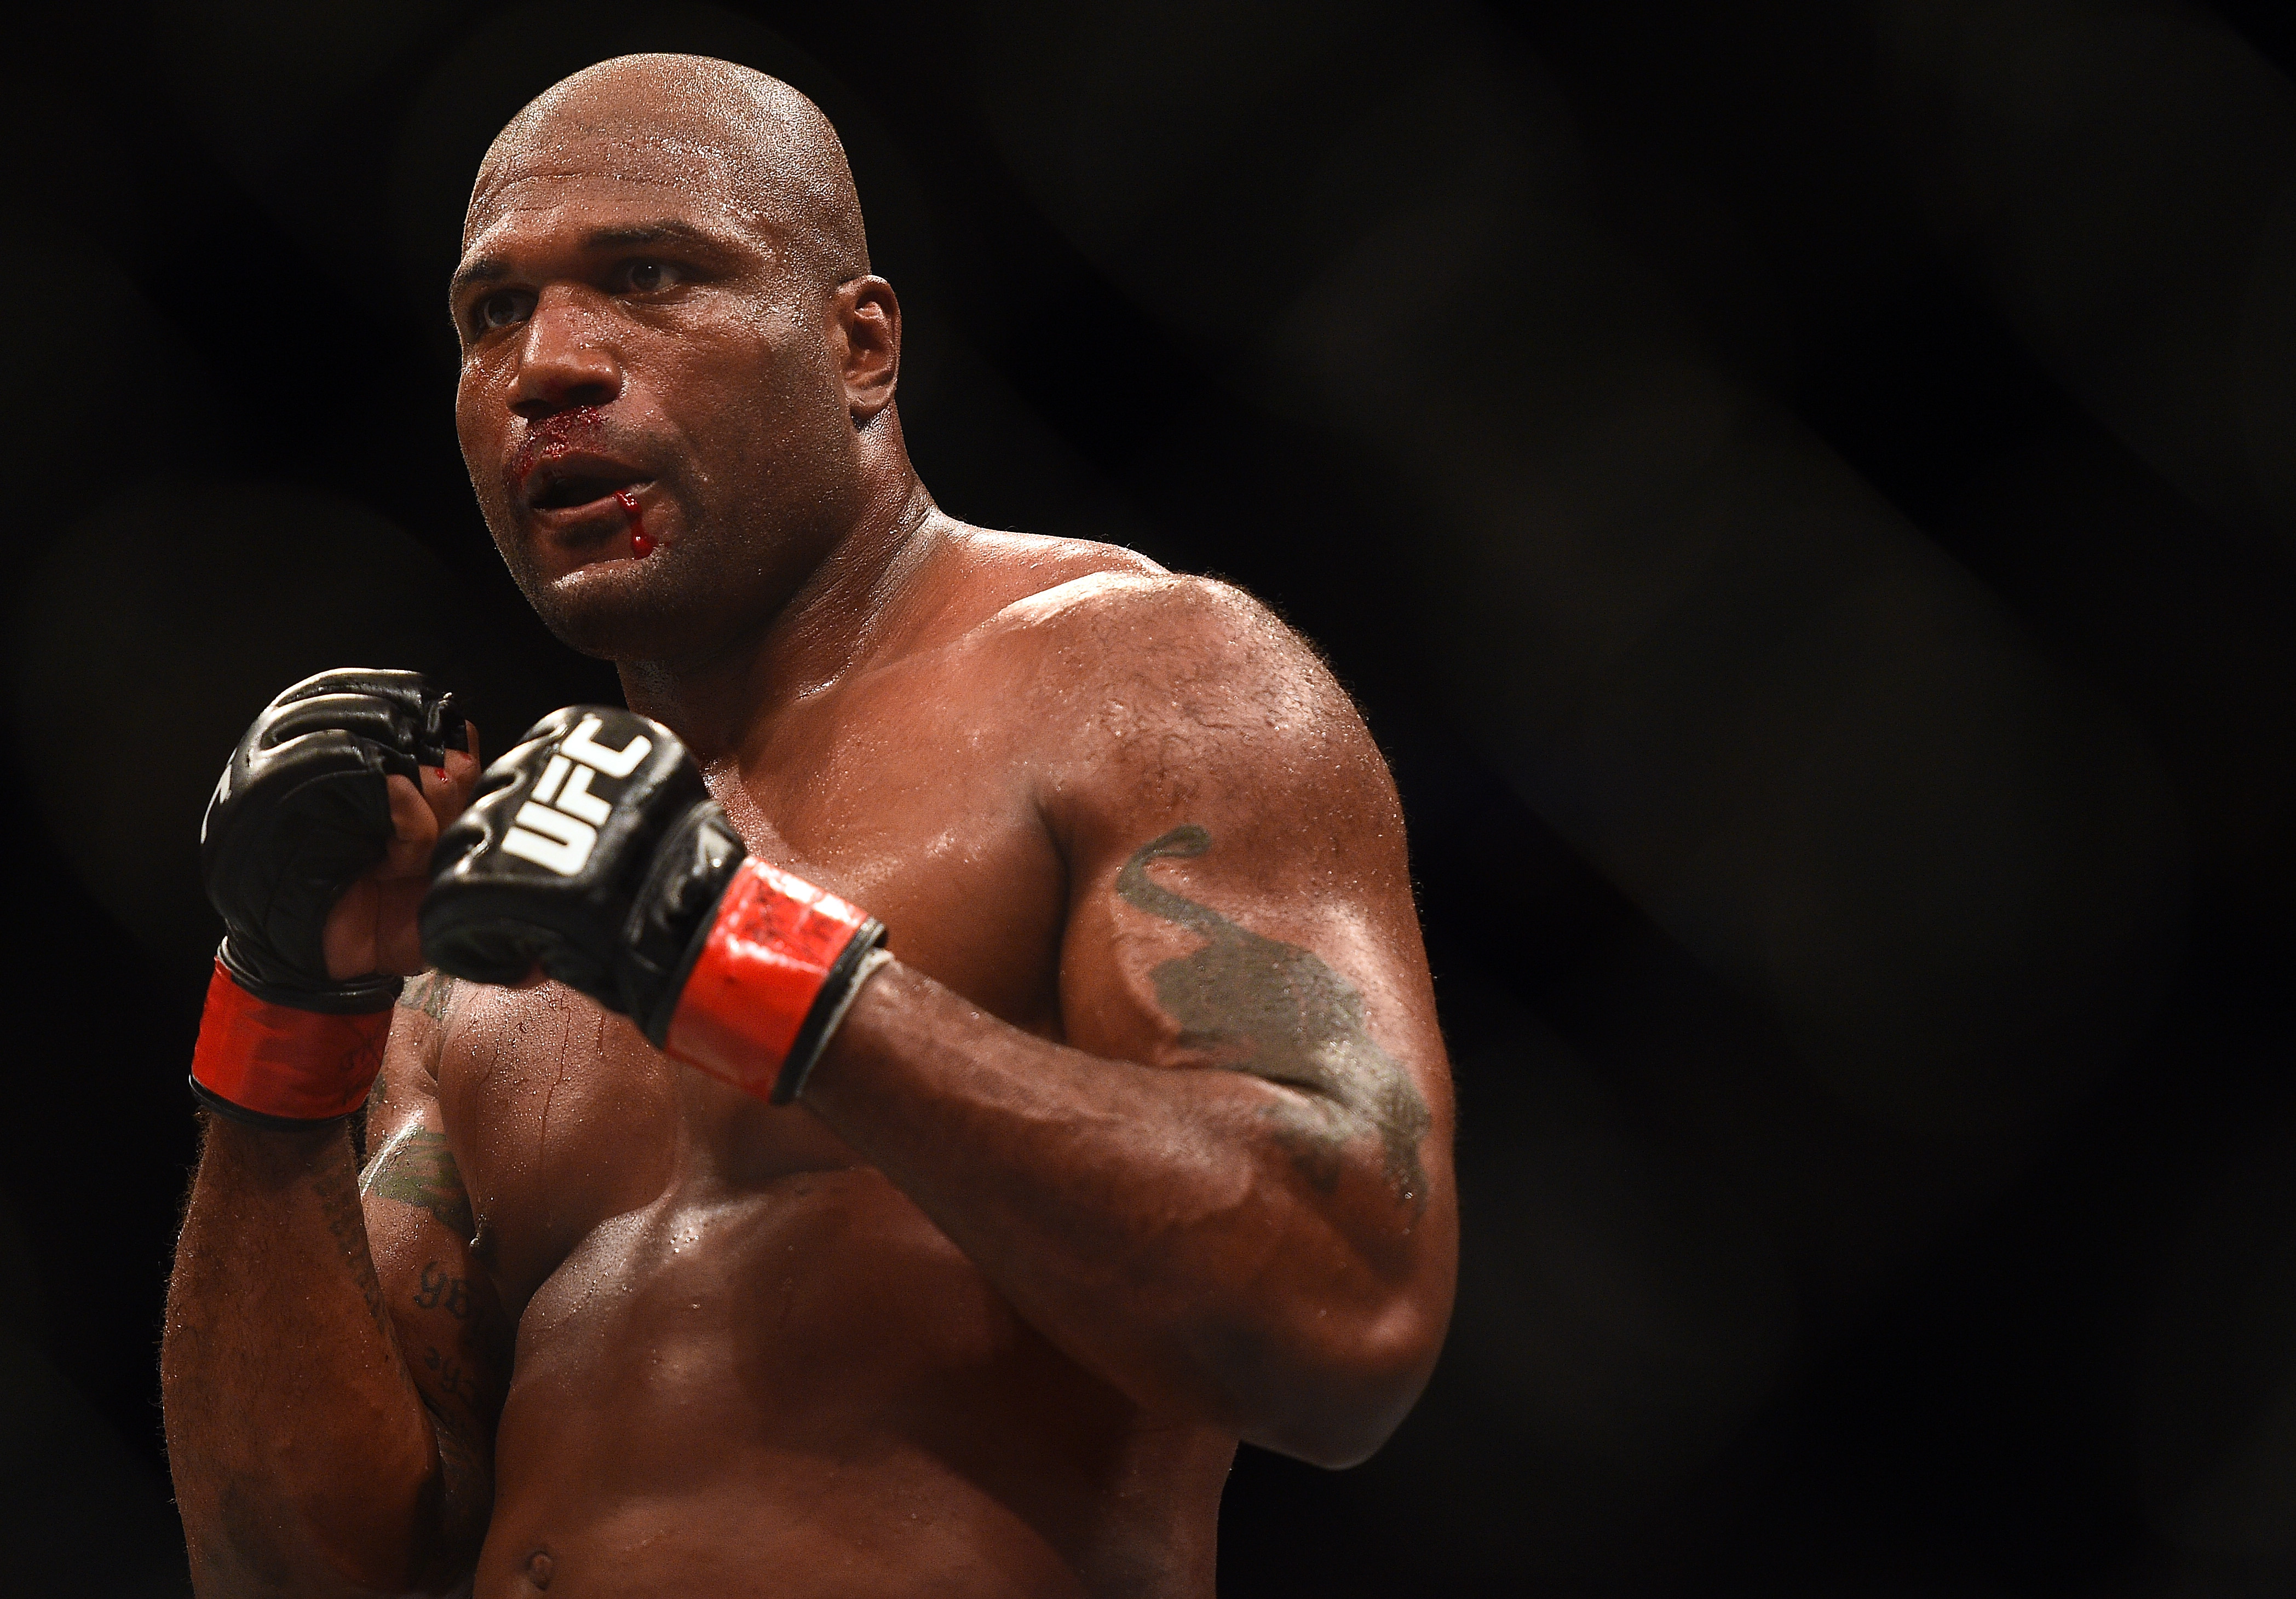 MMA Star Rampage Jackson Says the Future of Esports Is Bright - TheStreet
